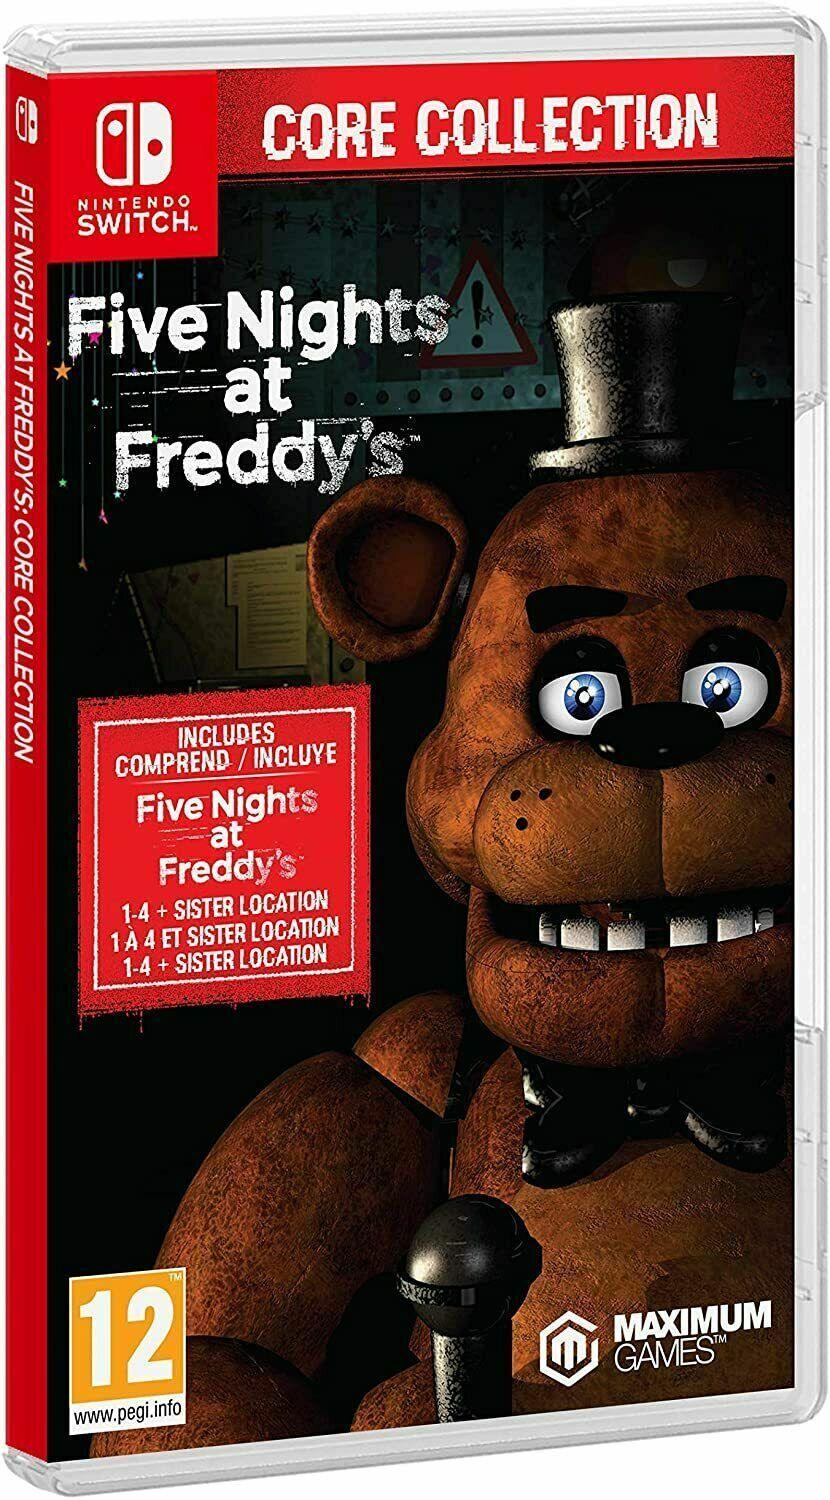 Five Nights at Freddys Core Collection - Nintendo Switch - GD Games 